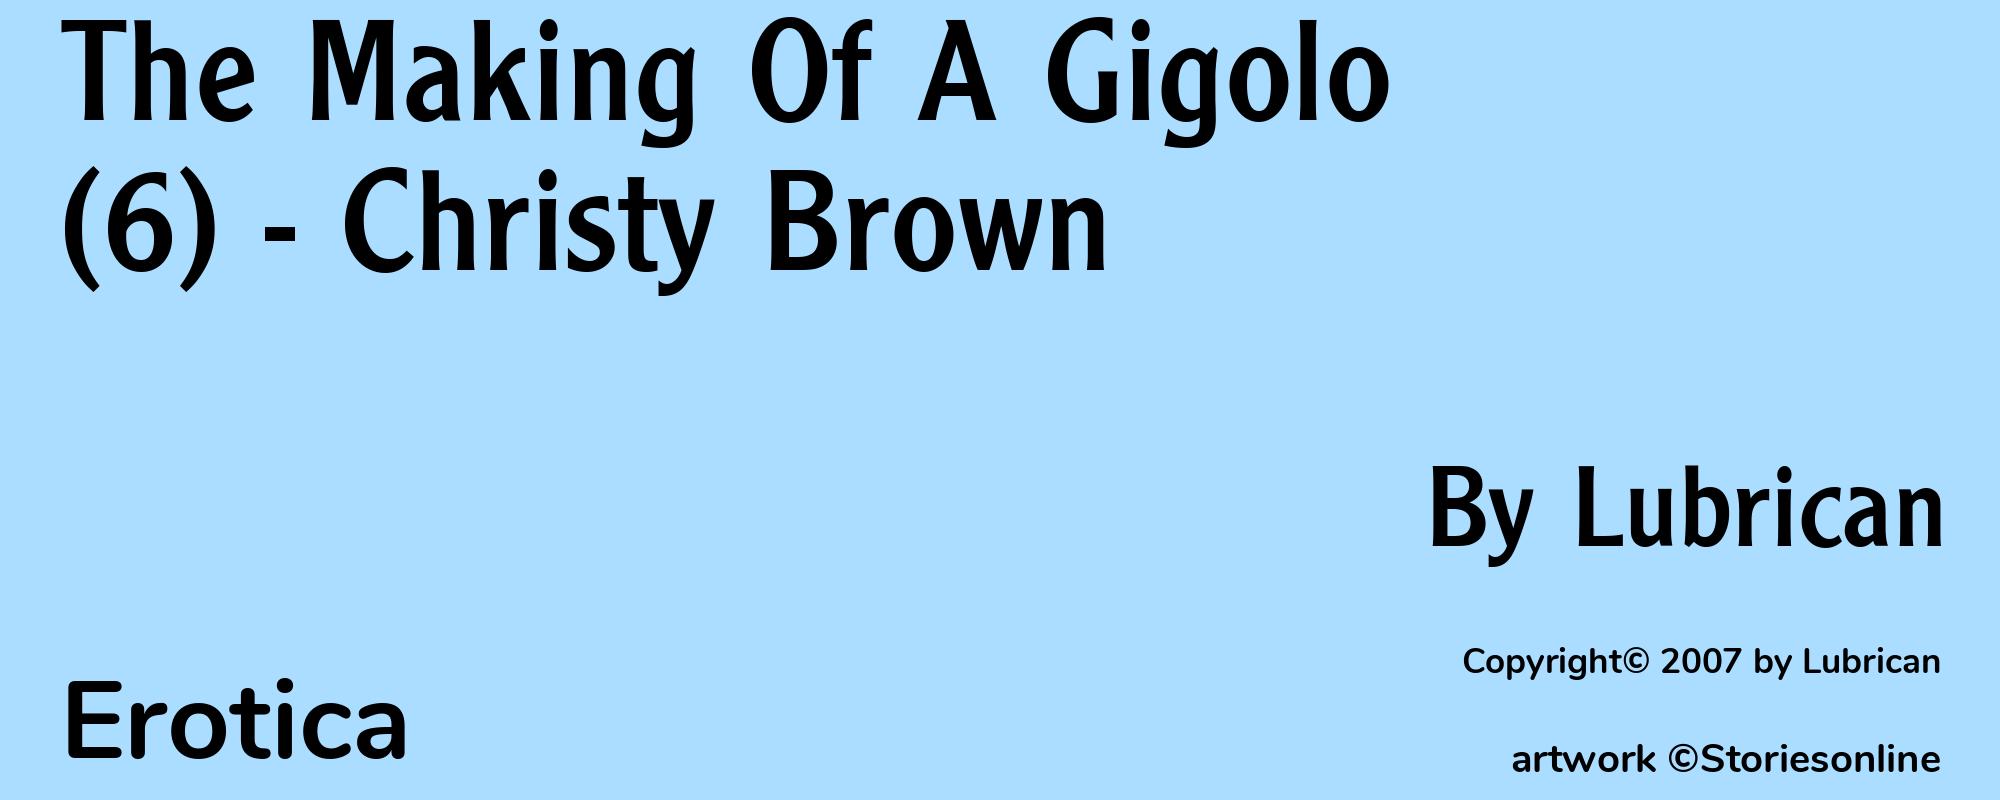 The Making Of A Gigolo (6) - Christy Brown - Cover